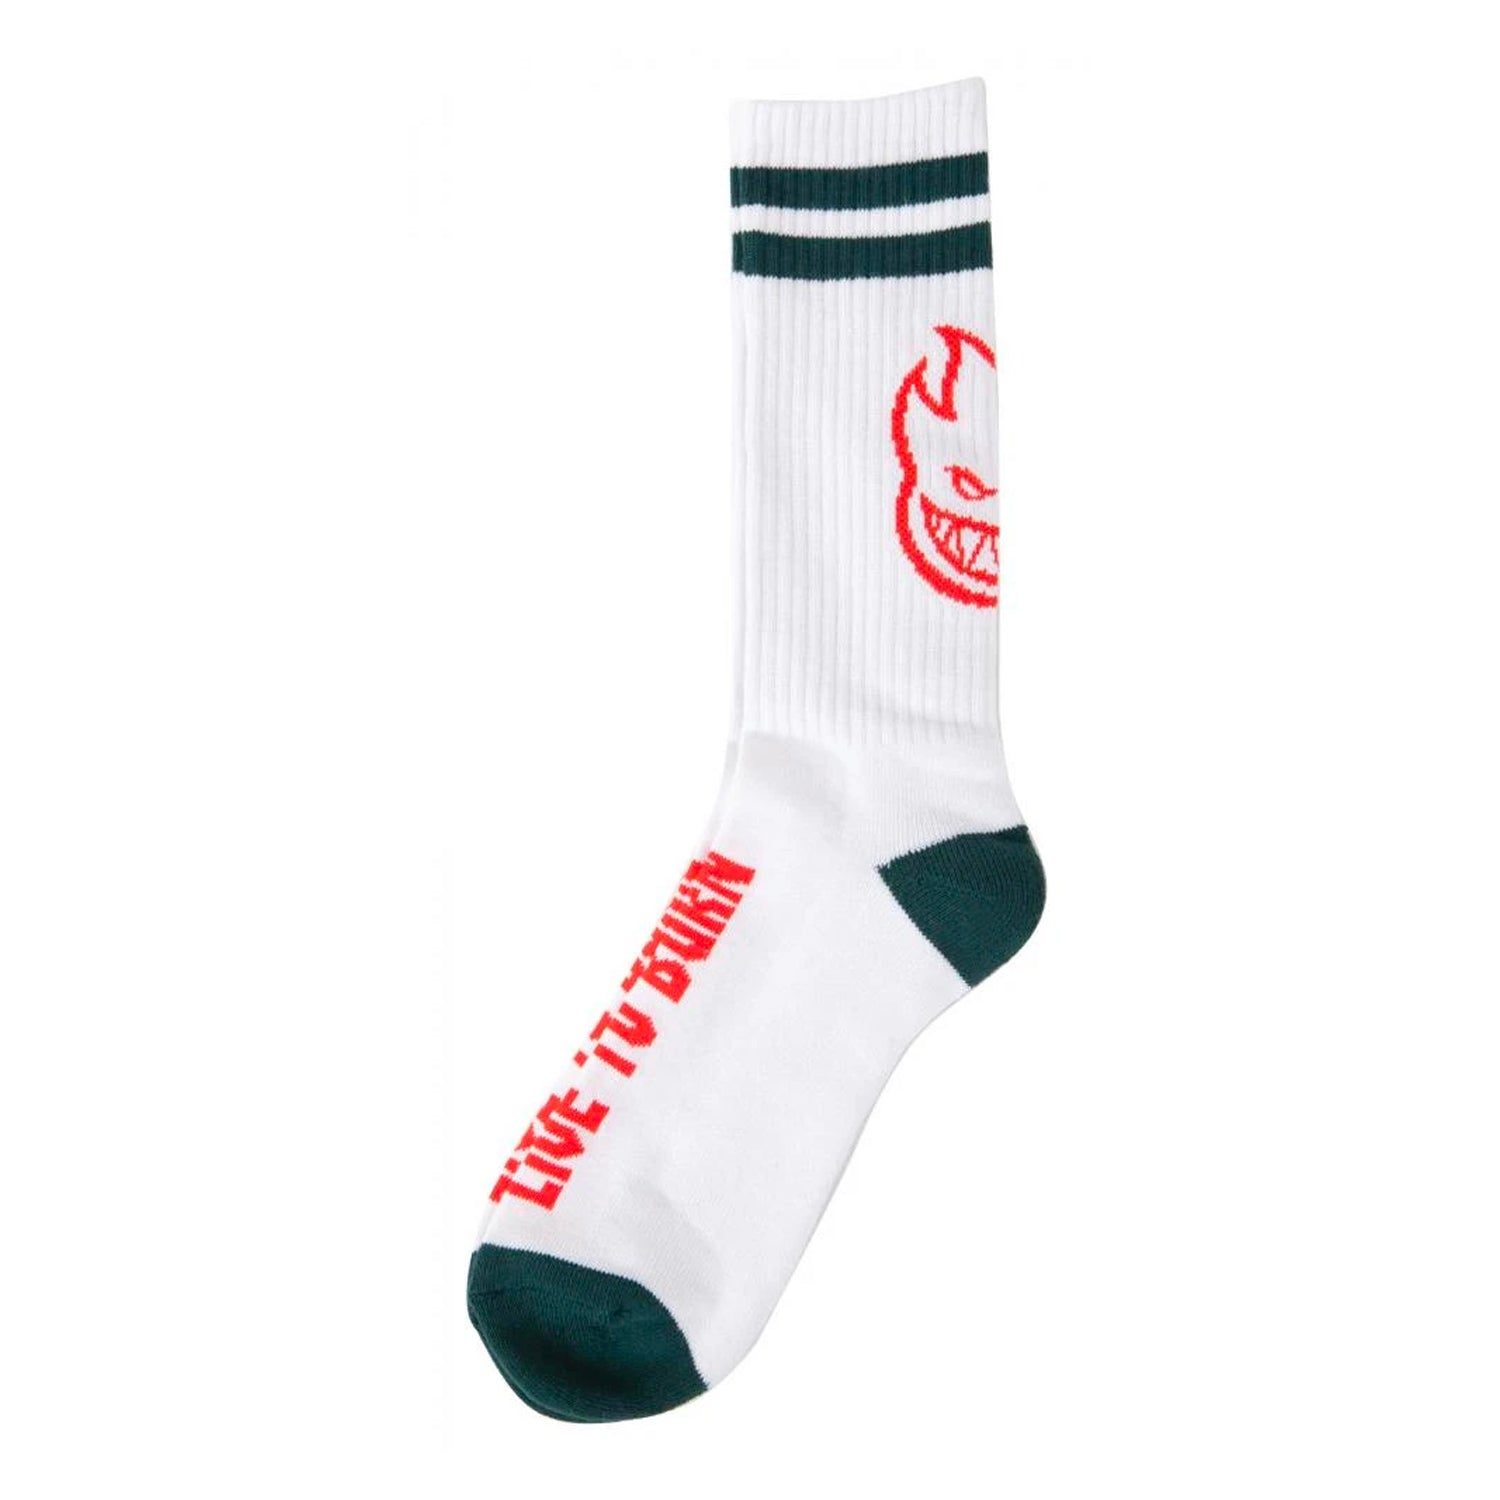 Spitfire Socks Sf Heads Up - White / Deep Teal / Red - Prime Delux Store